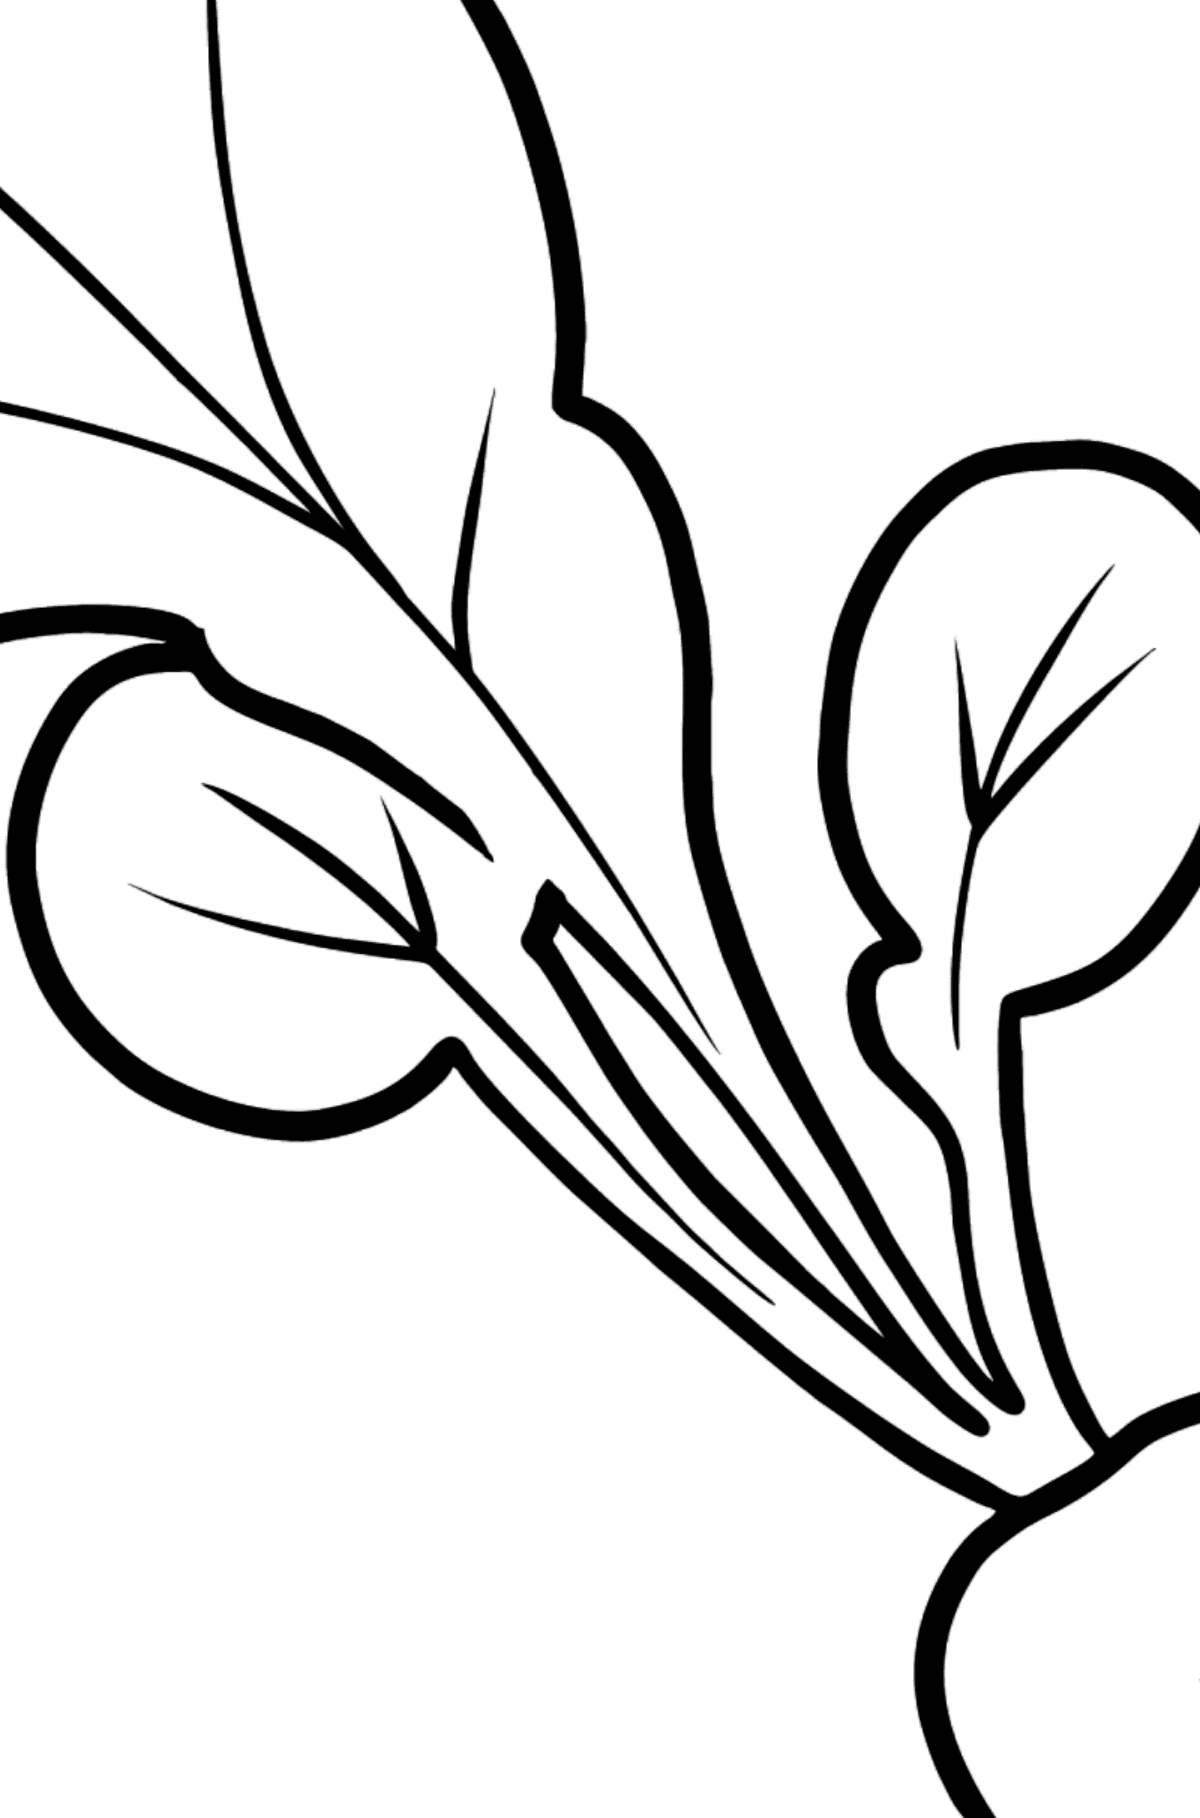 Radish coloring page - Coloring by Symbols for Kids